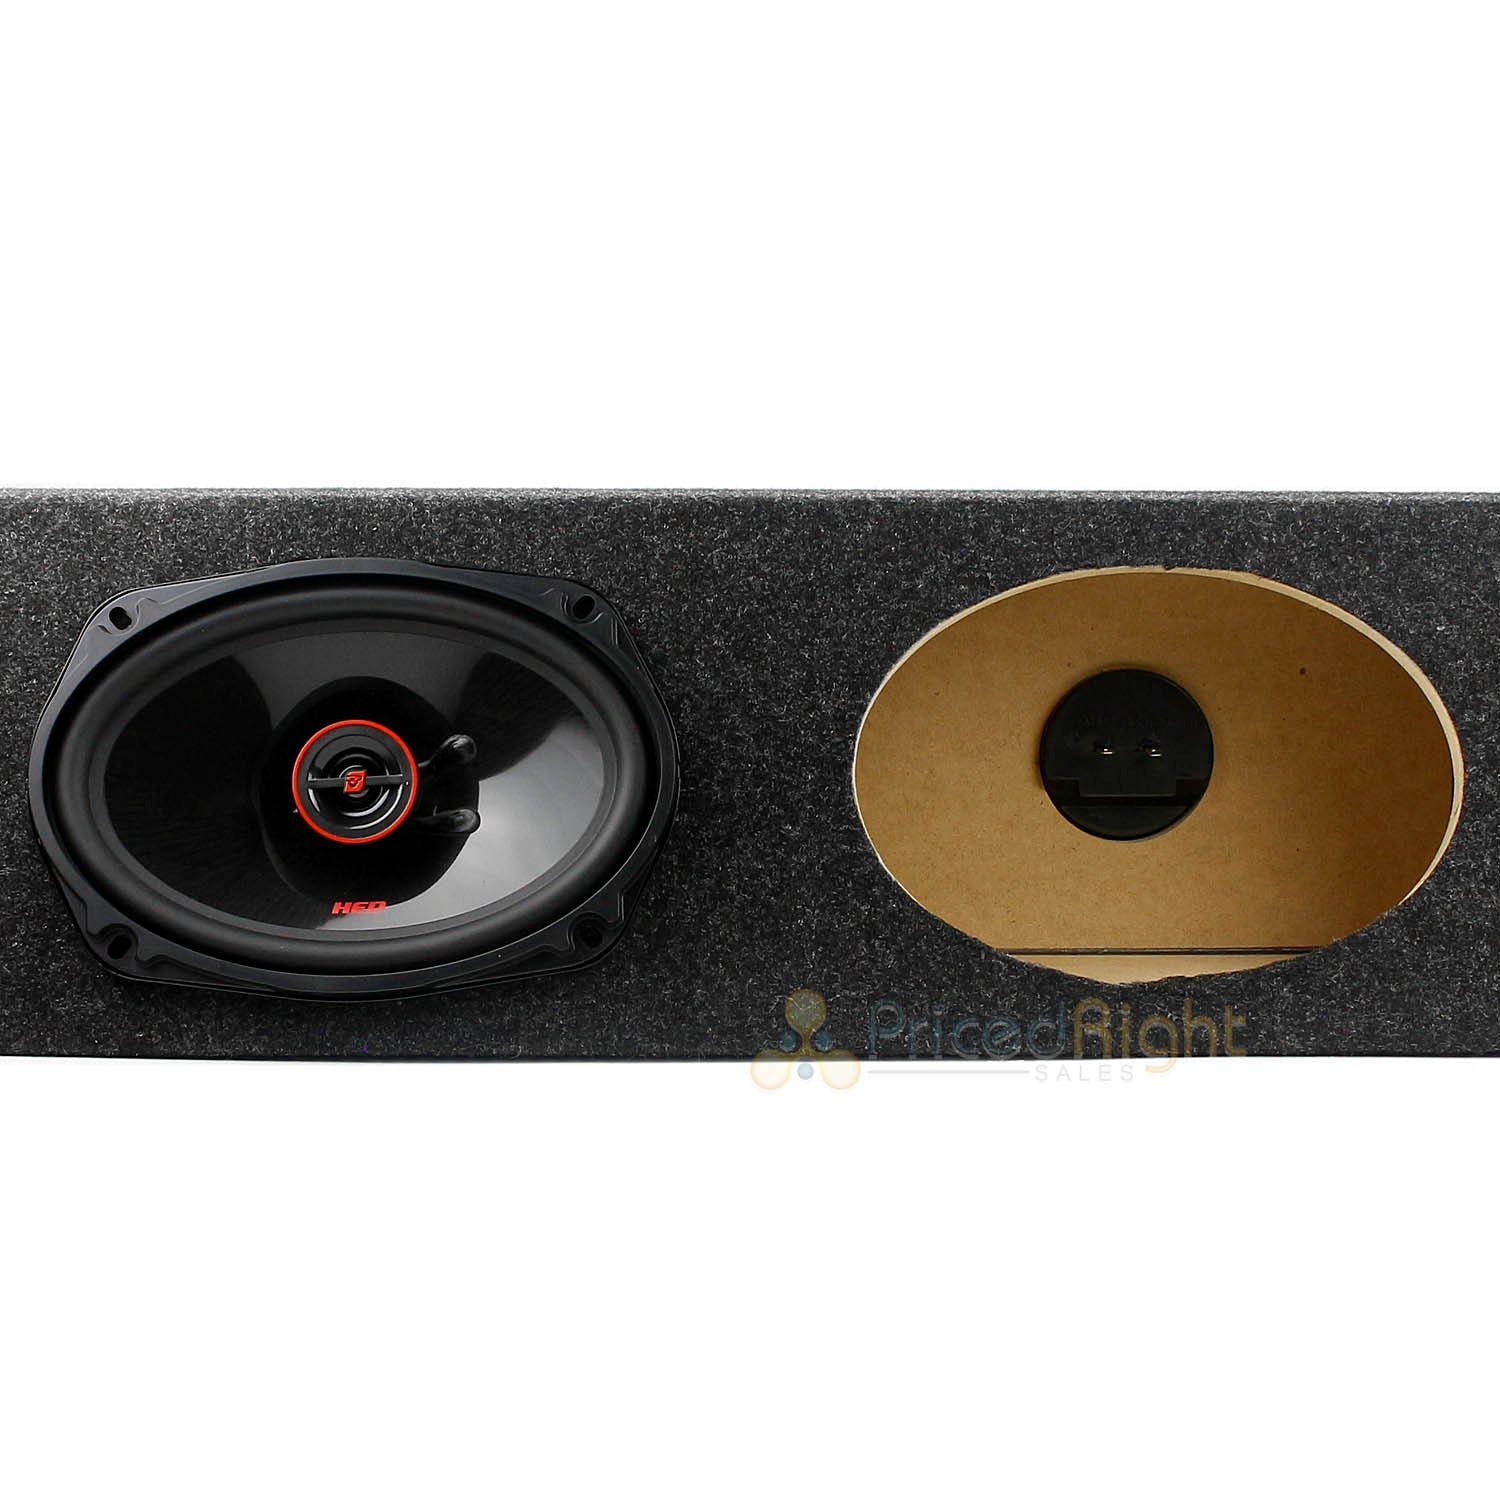 Cerwin Vega 6x9" 2-Way Coaxial Car Speakers with 4 Four Hole Box Enclosure H7692